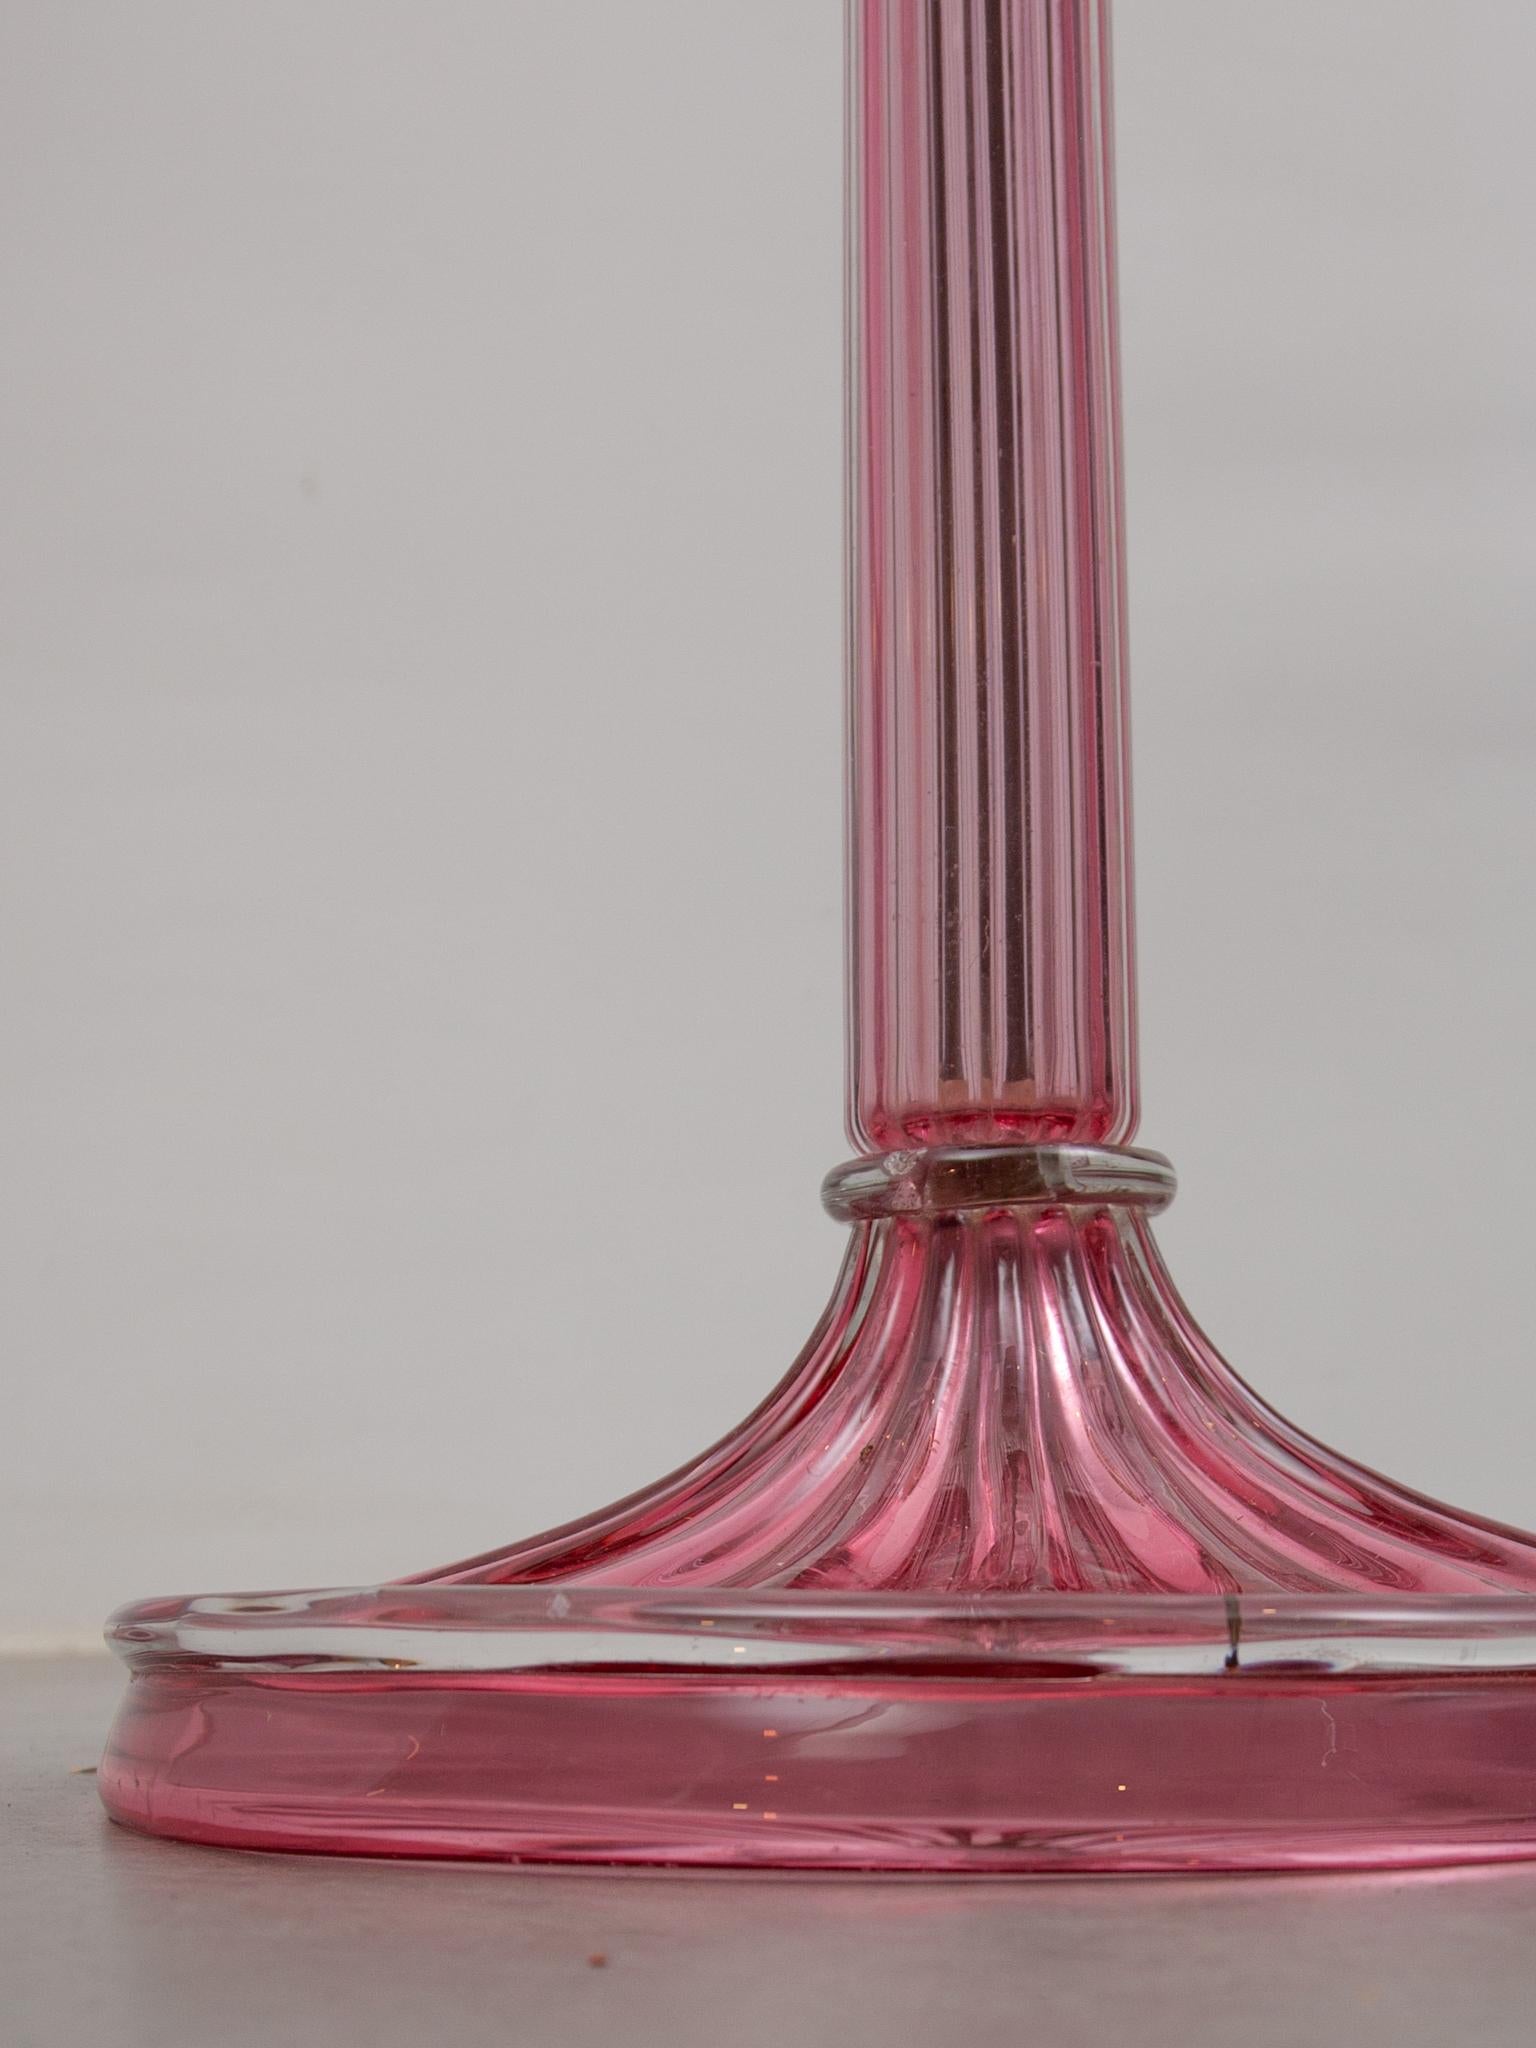 Barovier e Tosso Pink Art Glass Floor Lamp, Murano Blown Glass, 1950s, Italy For Sale 3